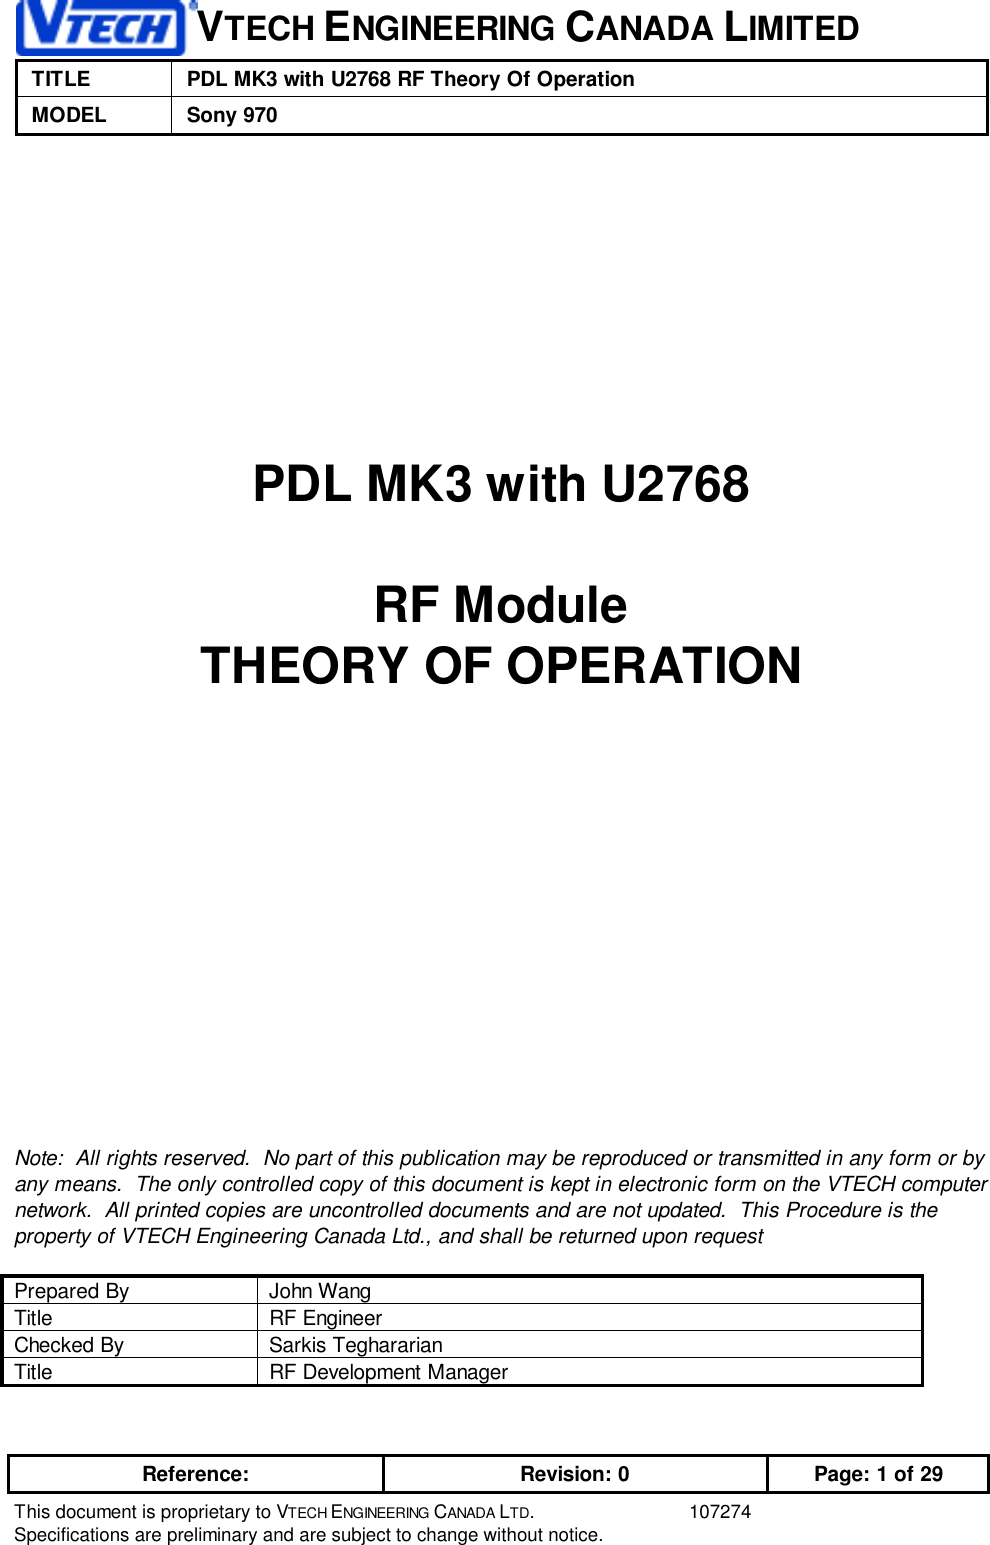 VTECH ENGINEERING CANADA LIMITEDTITLE PDL MK3 with U2768 RF Theory Of OperationMODEL Sony 970Reference: Revision: 0 Page: 1 of 29This document is proprietary to VTECH ENGINEERING CANADA LTD. 107274Specifications are preliminary and are subject to change without notice.PDL MK3 with U2768RF ModuleTHEORY OF OPERATIONNote:  All rights reserved.  No part of this publication may be reproduced or transmitted in any form or byany means.  The only controlled copy of this document is kept in electronic form on the VTECH computernetwork.  All printed copies are uncontrolled documents and are not updated.  This Procedure is theproperty of VTECH Engineering Canada Ltd., and shall be returned upon requestPrepared By John WangTitle RF EngineerChecked By Sarkis TeghararianTitle RF Development Manager